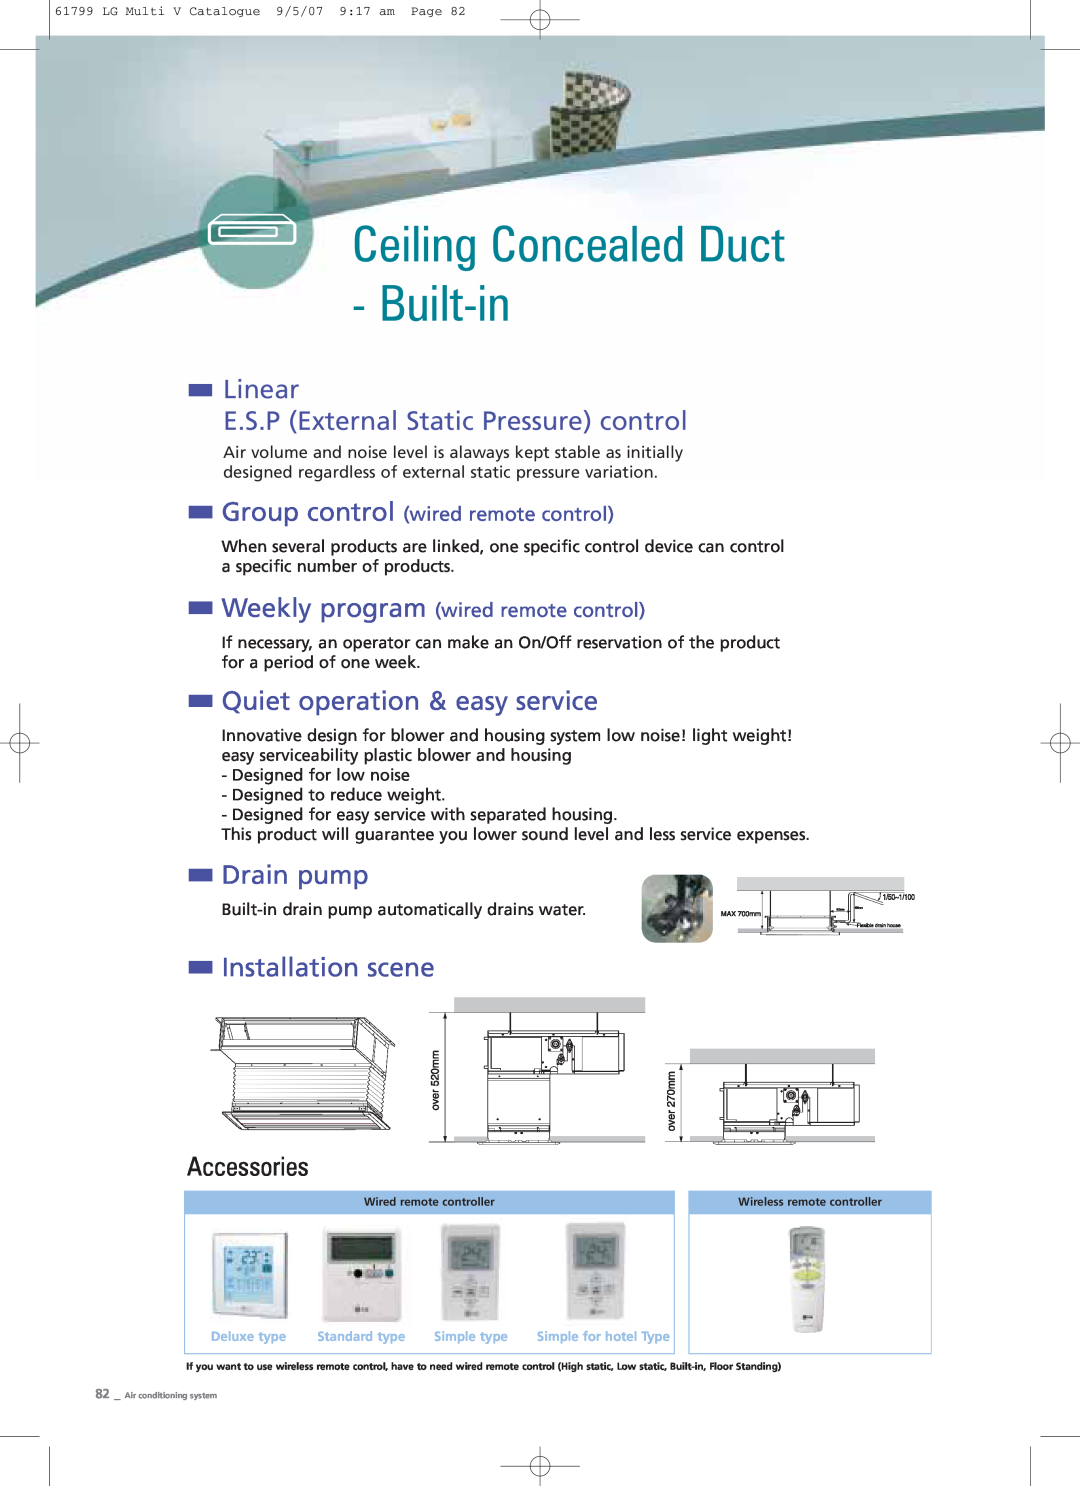 LG Electronics PRHR040 Ceiling Concealed Duct Built-in, Installation scene, Linear E.S.P External Static Pressure control 